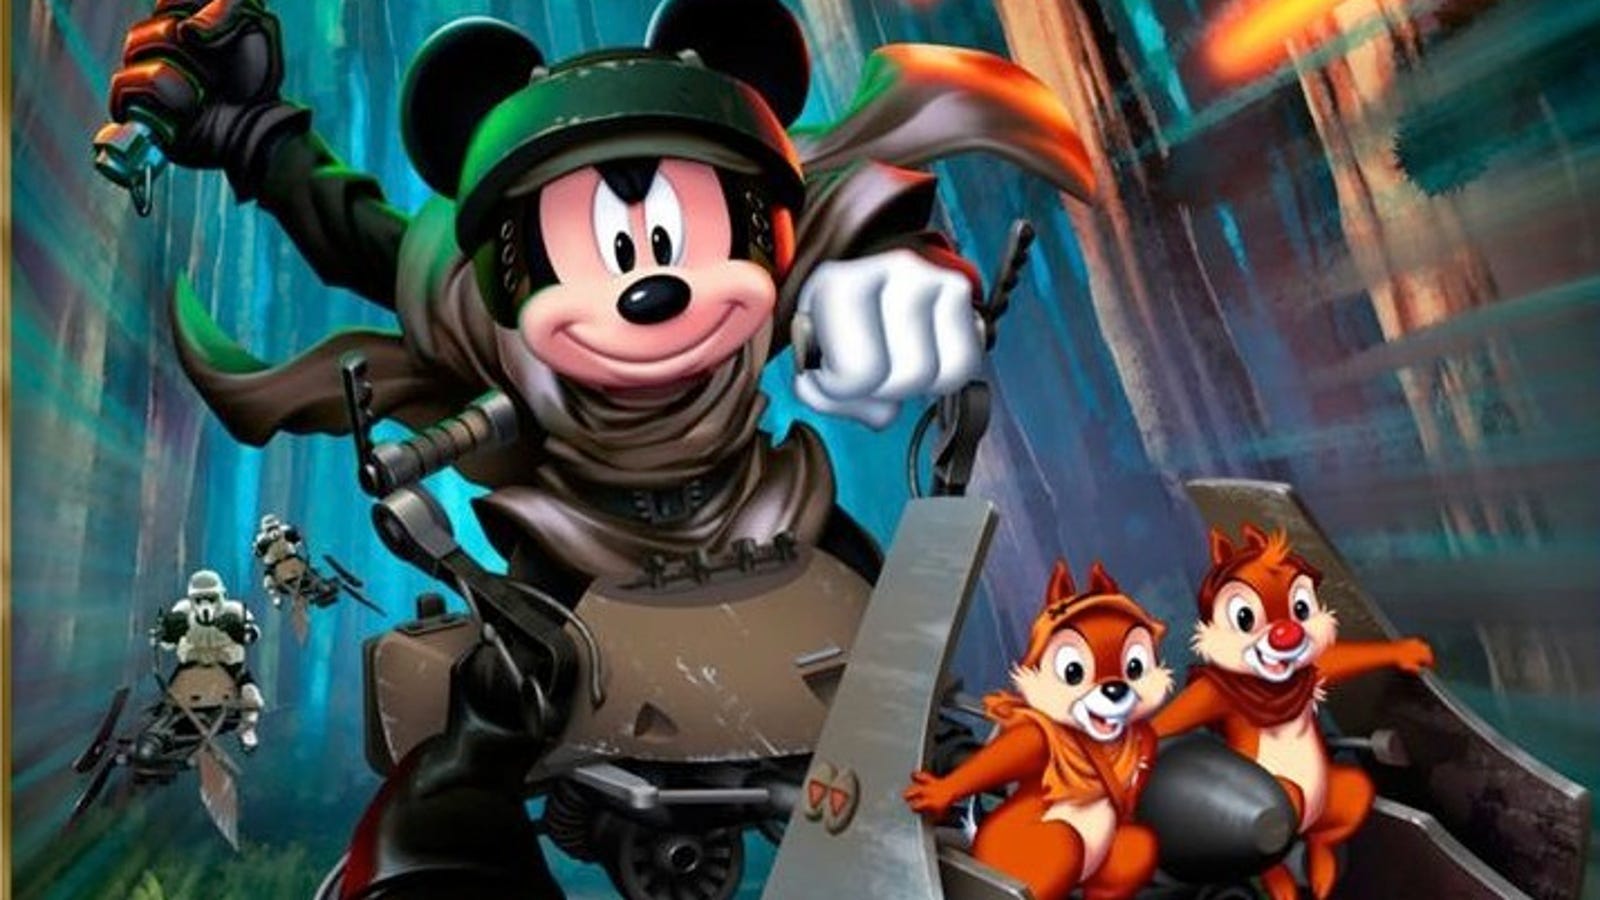 mickey-wields-his-lightsaber-in-the-first-official-disney-star-wars